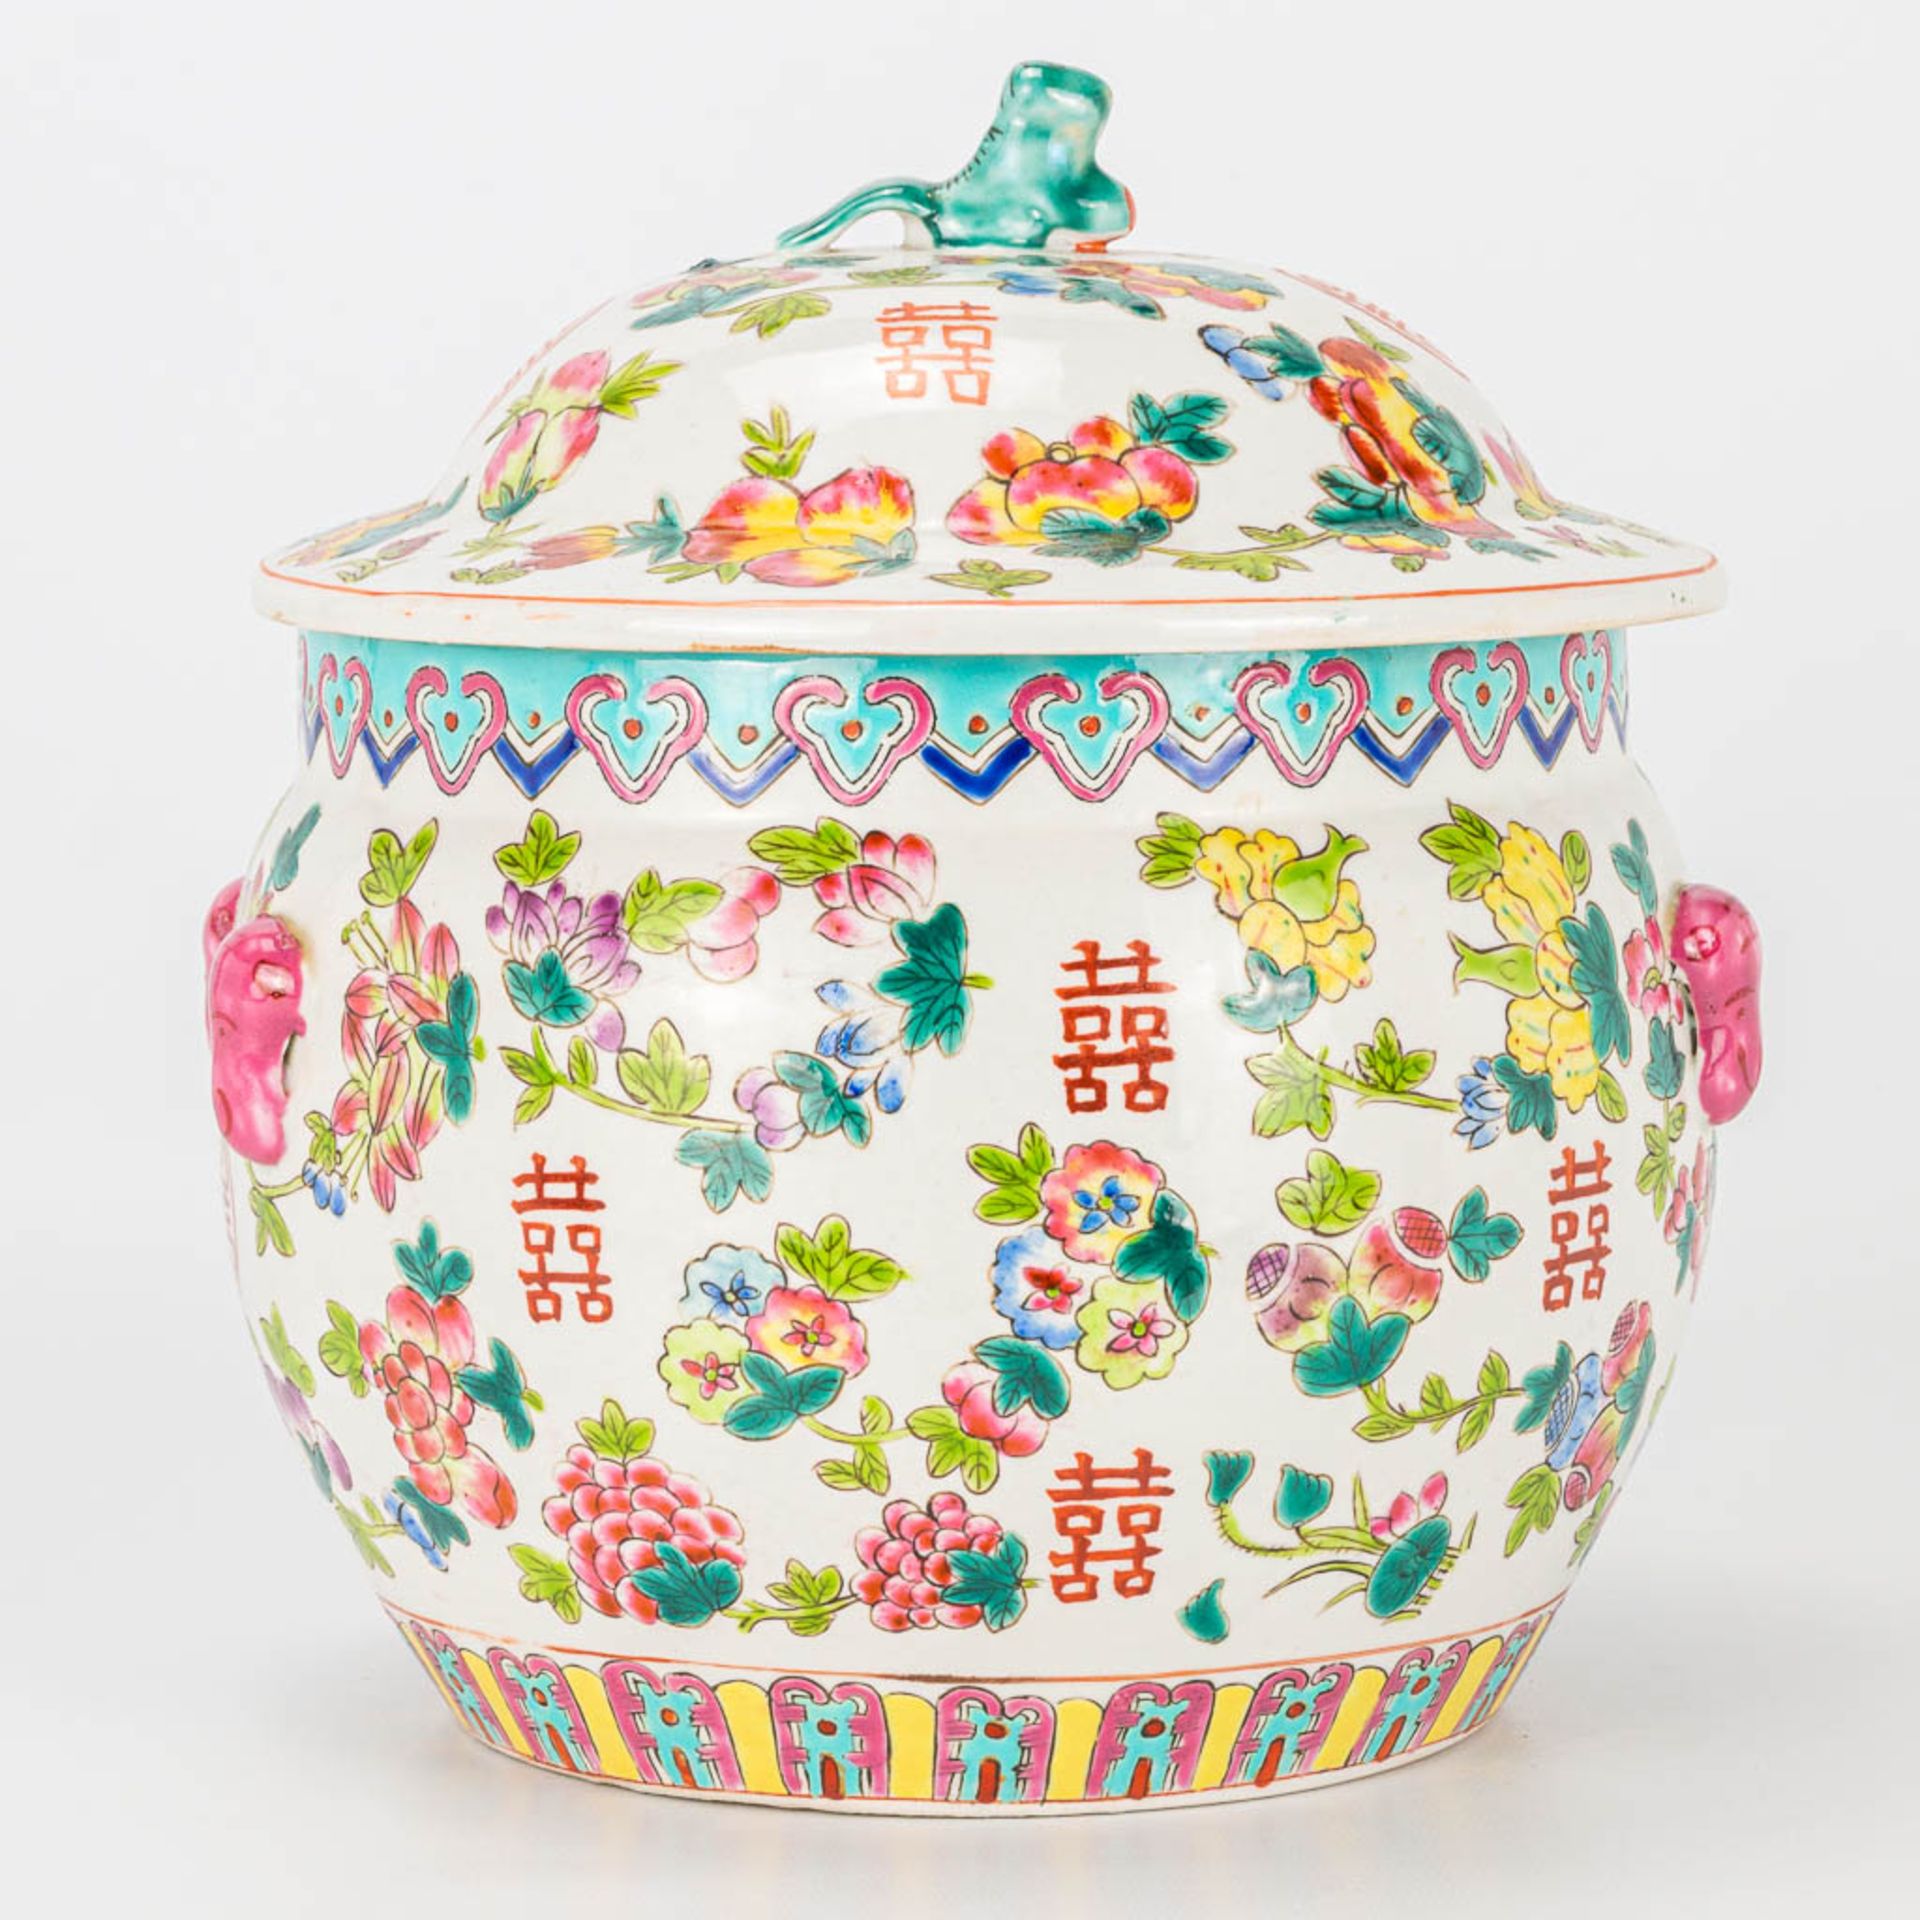 A jar made of Chinese porcelain and decorated with flowers. Marked Tongzhi, 19th/20th century.